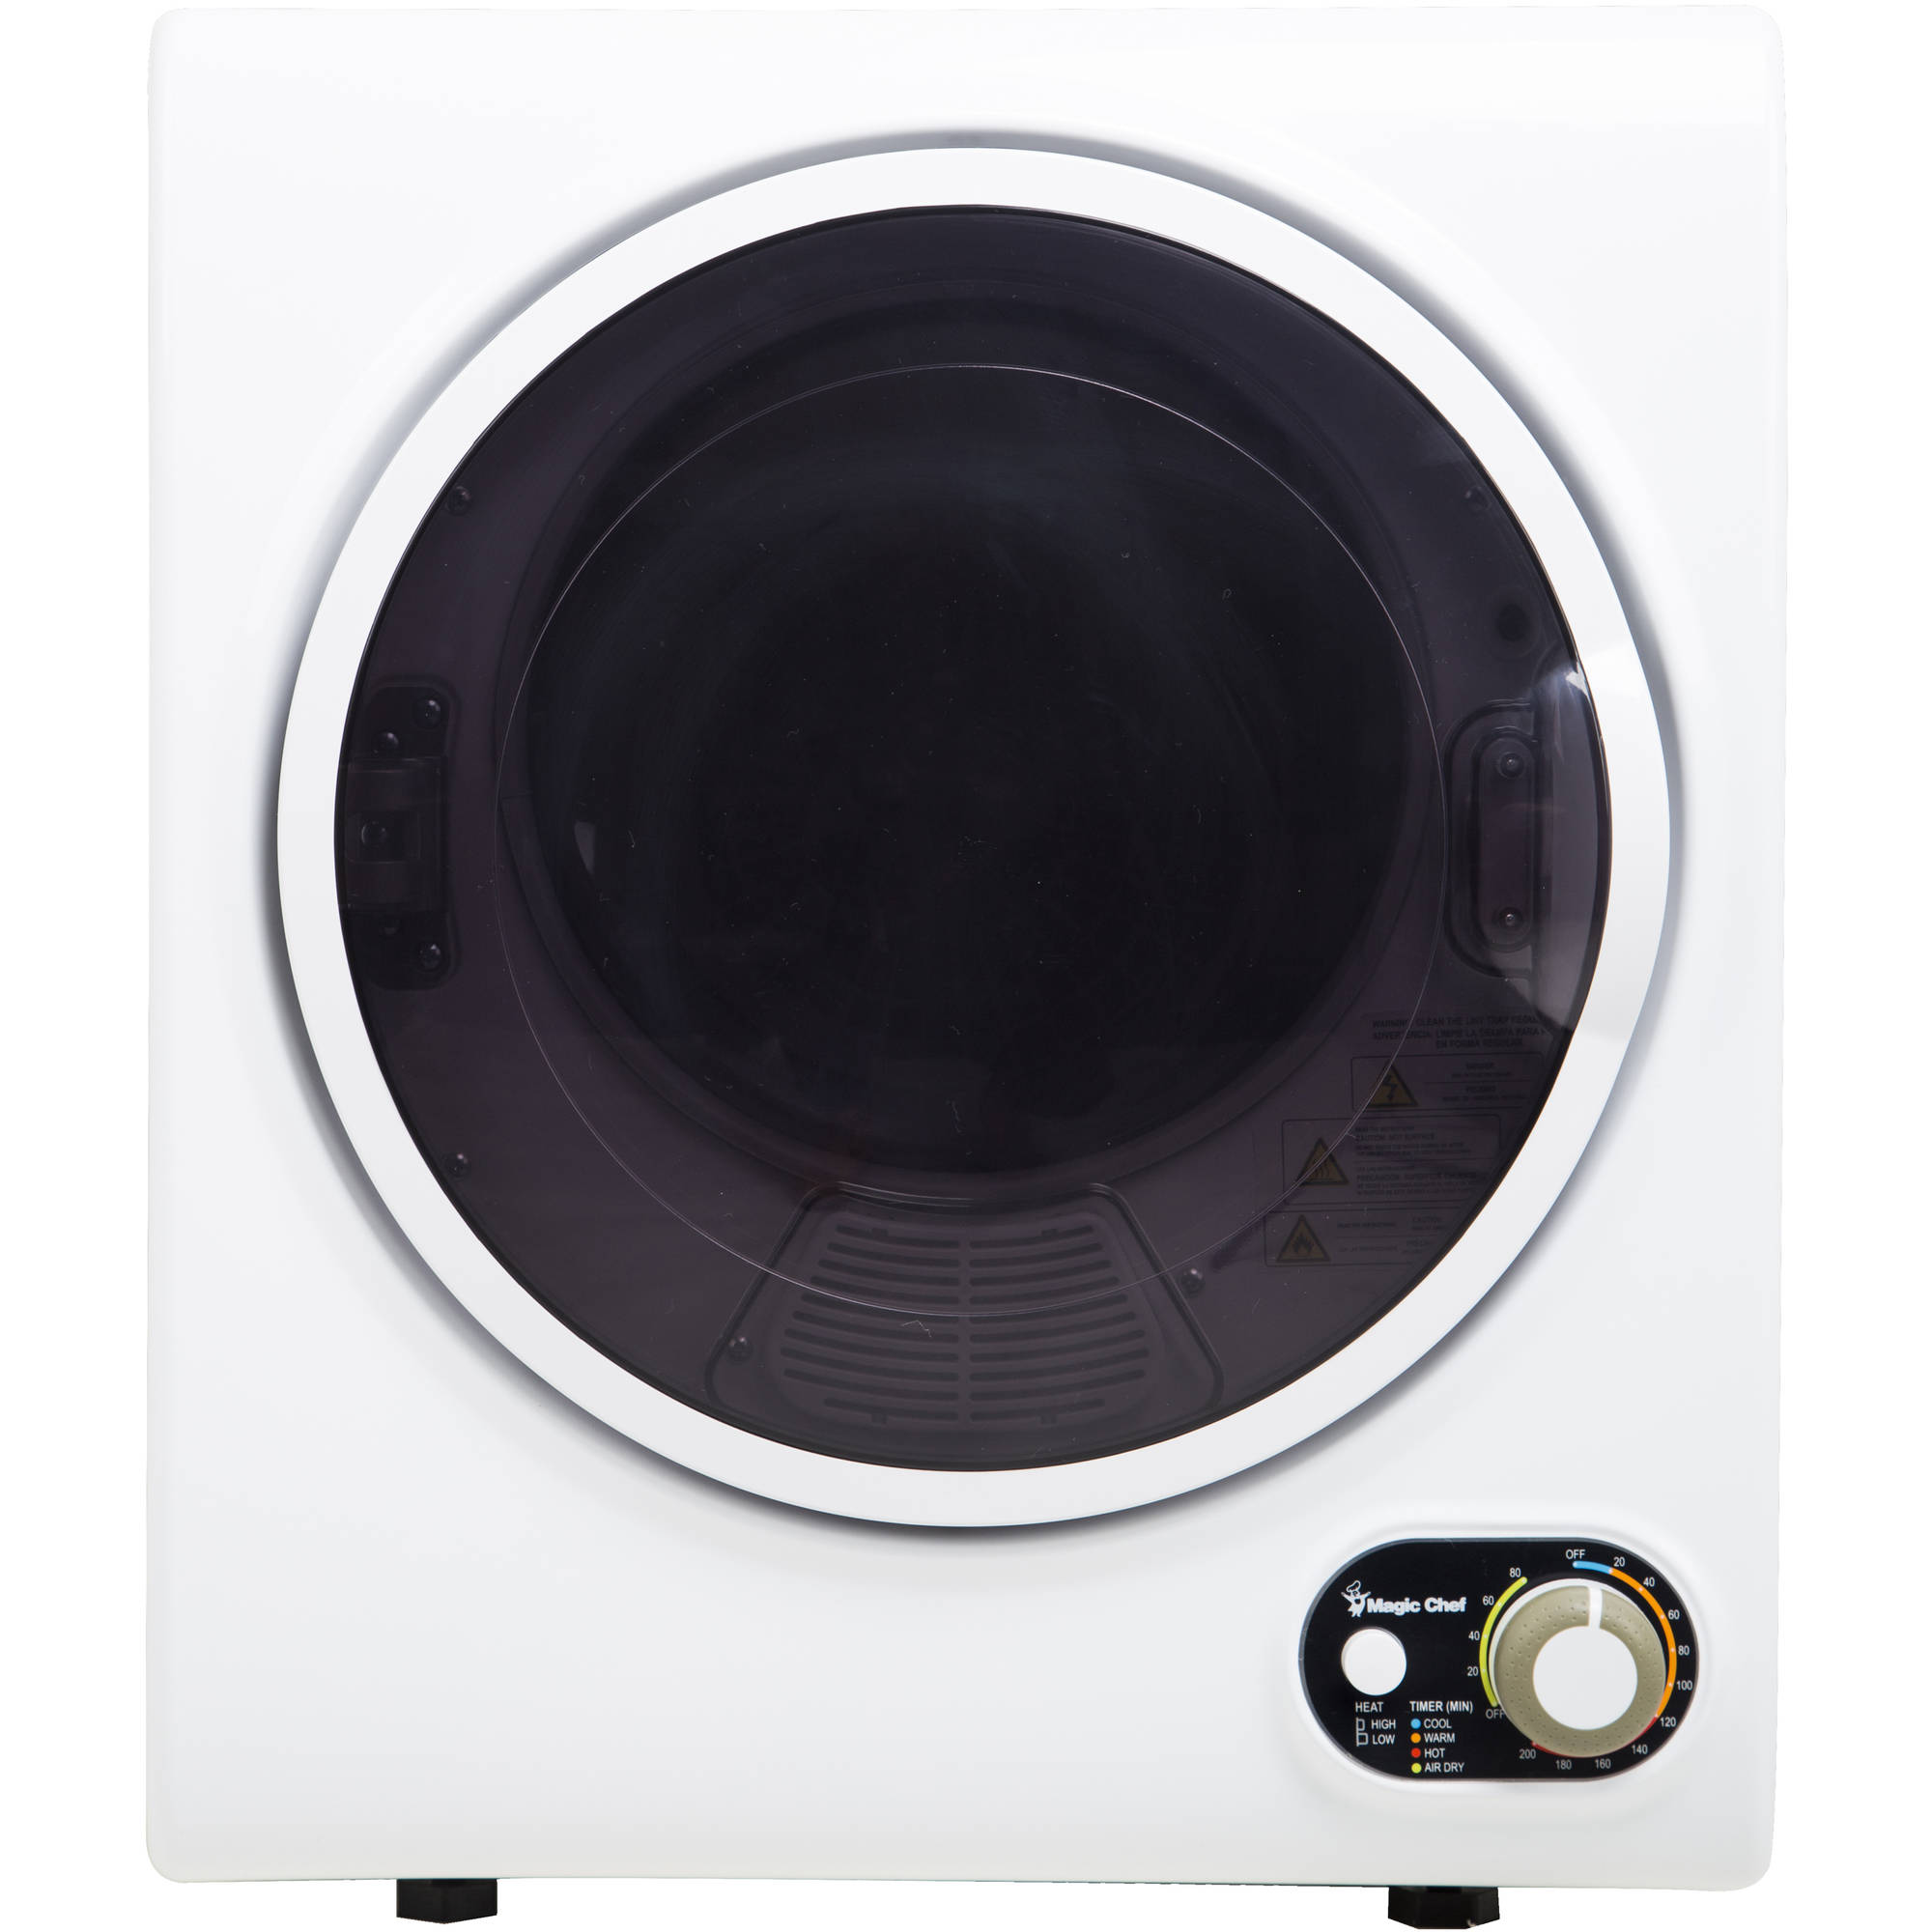 1.5 Cu. ft Magic Chef Wall-mountable Compact Electric Dryer White $173.74 + Free Shipping